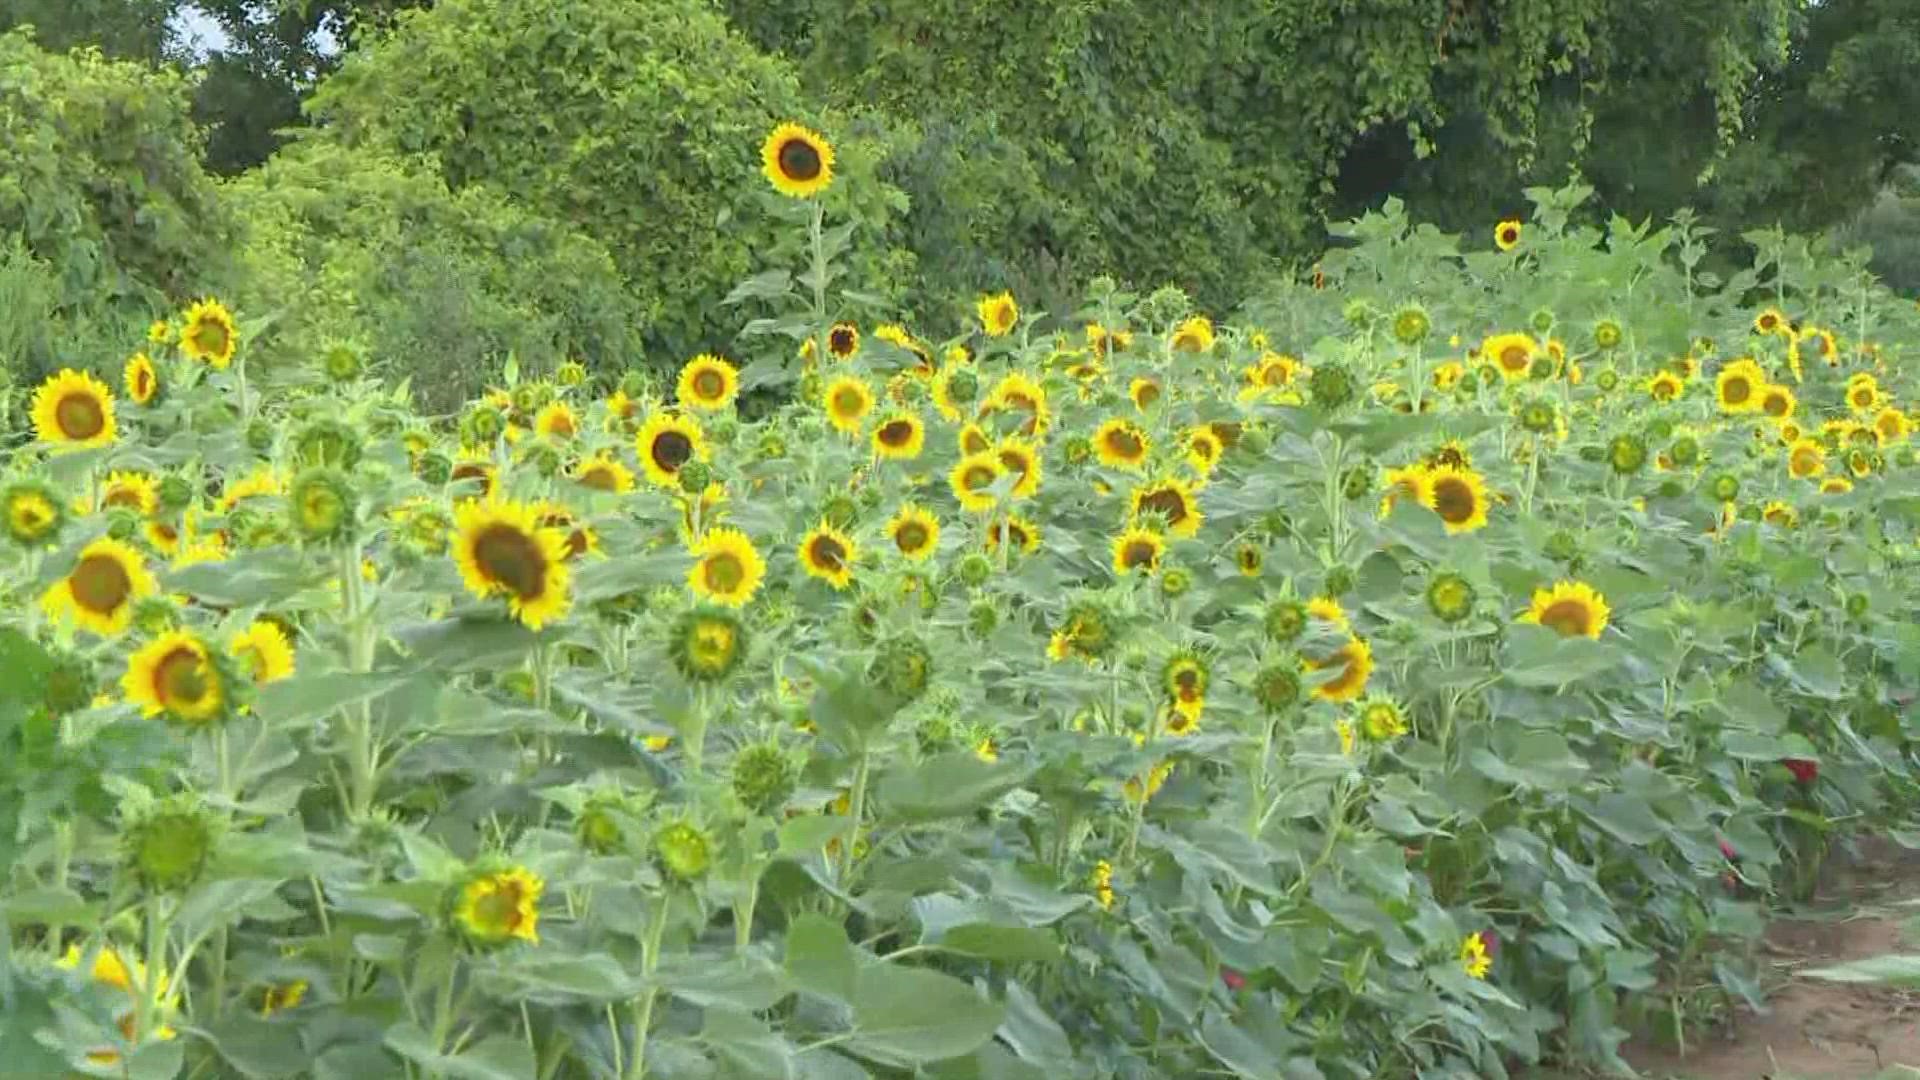 The Sunflowers of Sanborn officially opened at the beginning of the month but the sunflowers are starting to bloom.